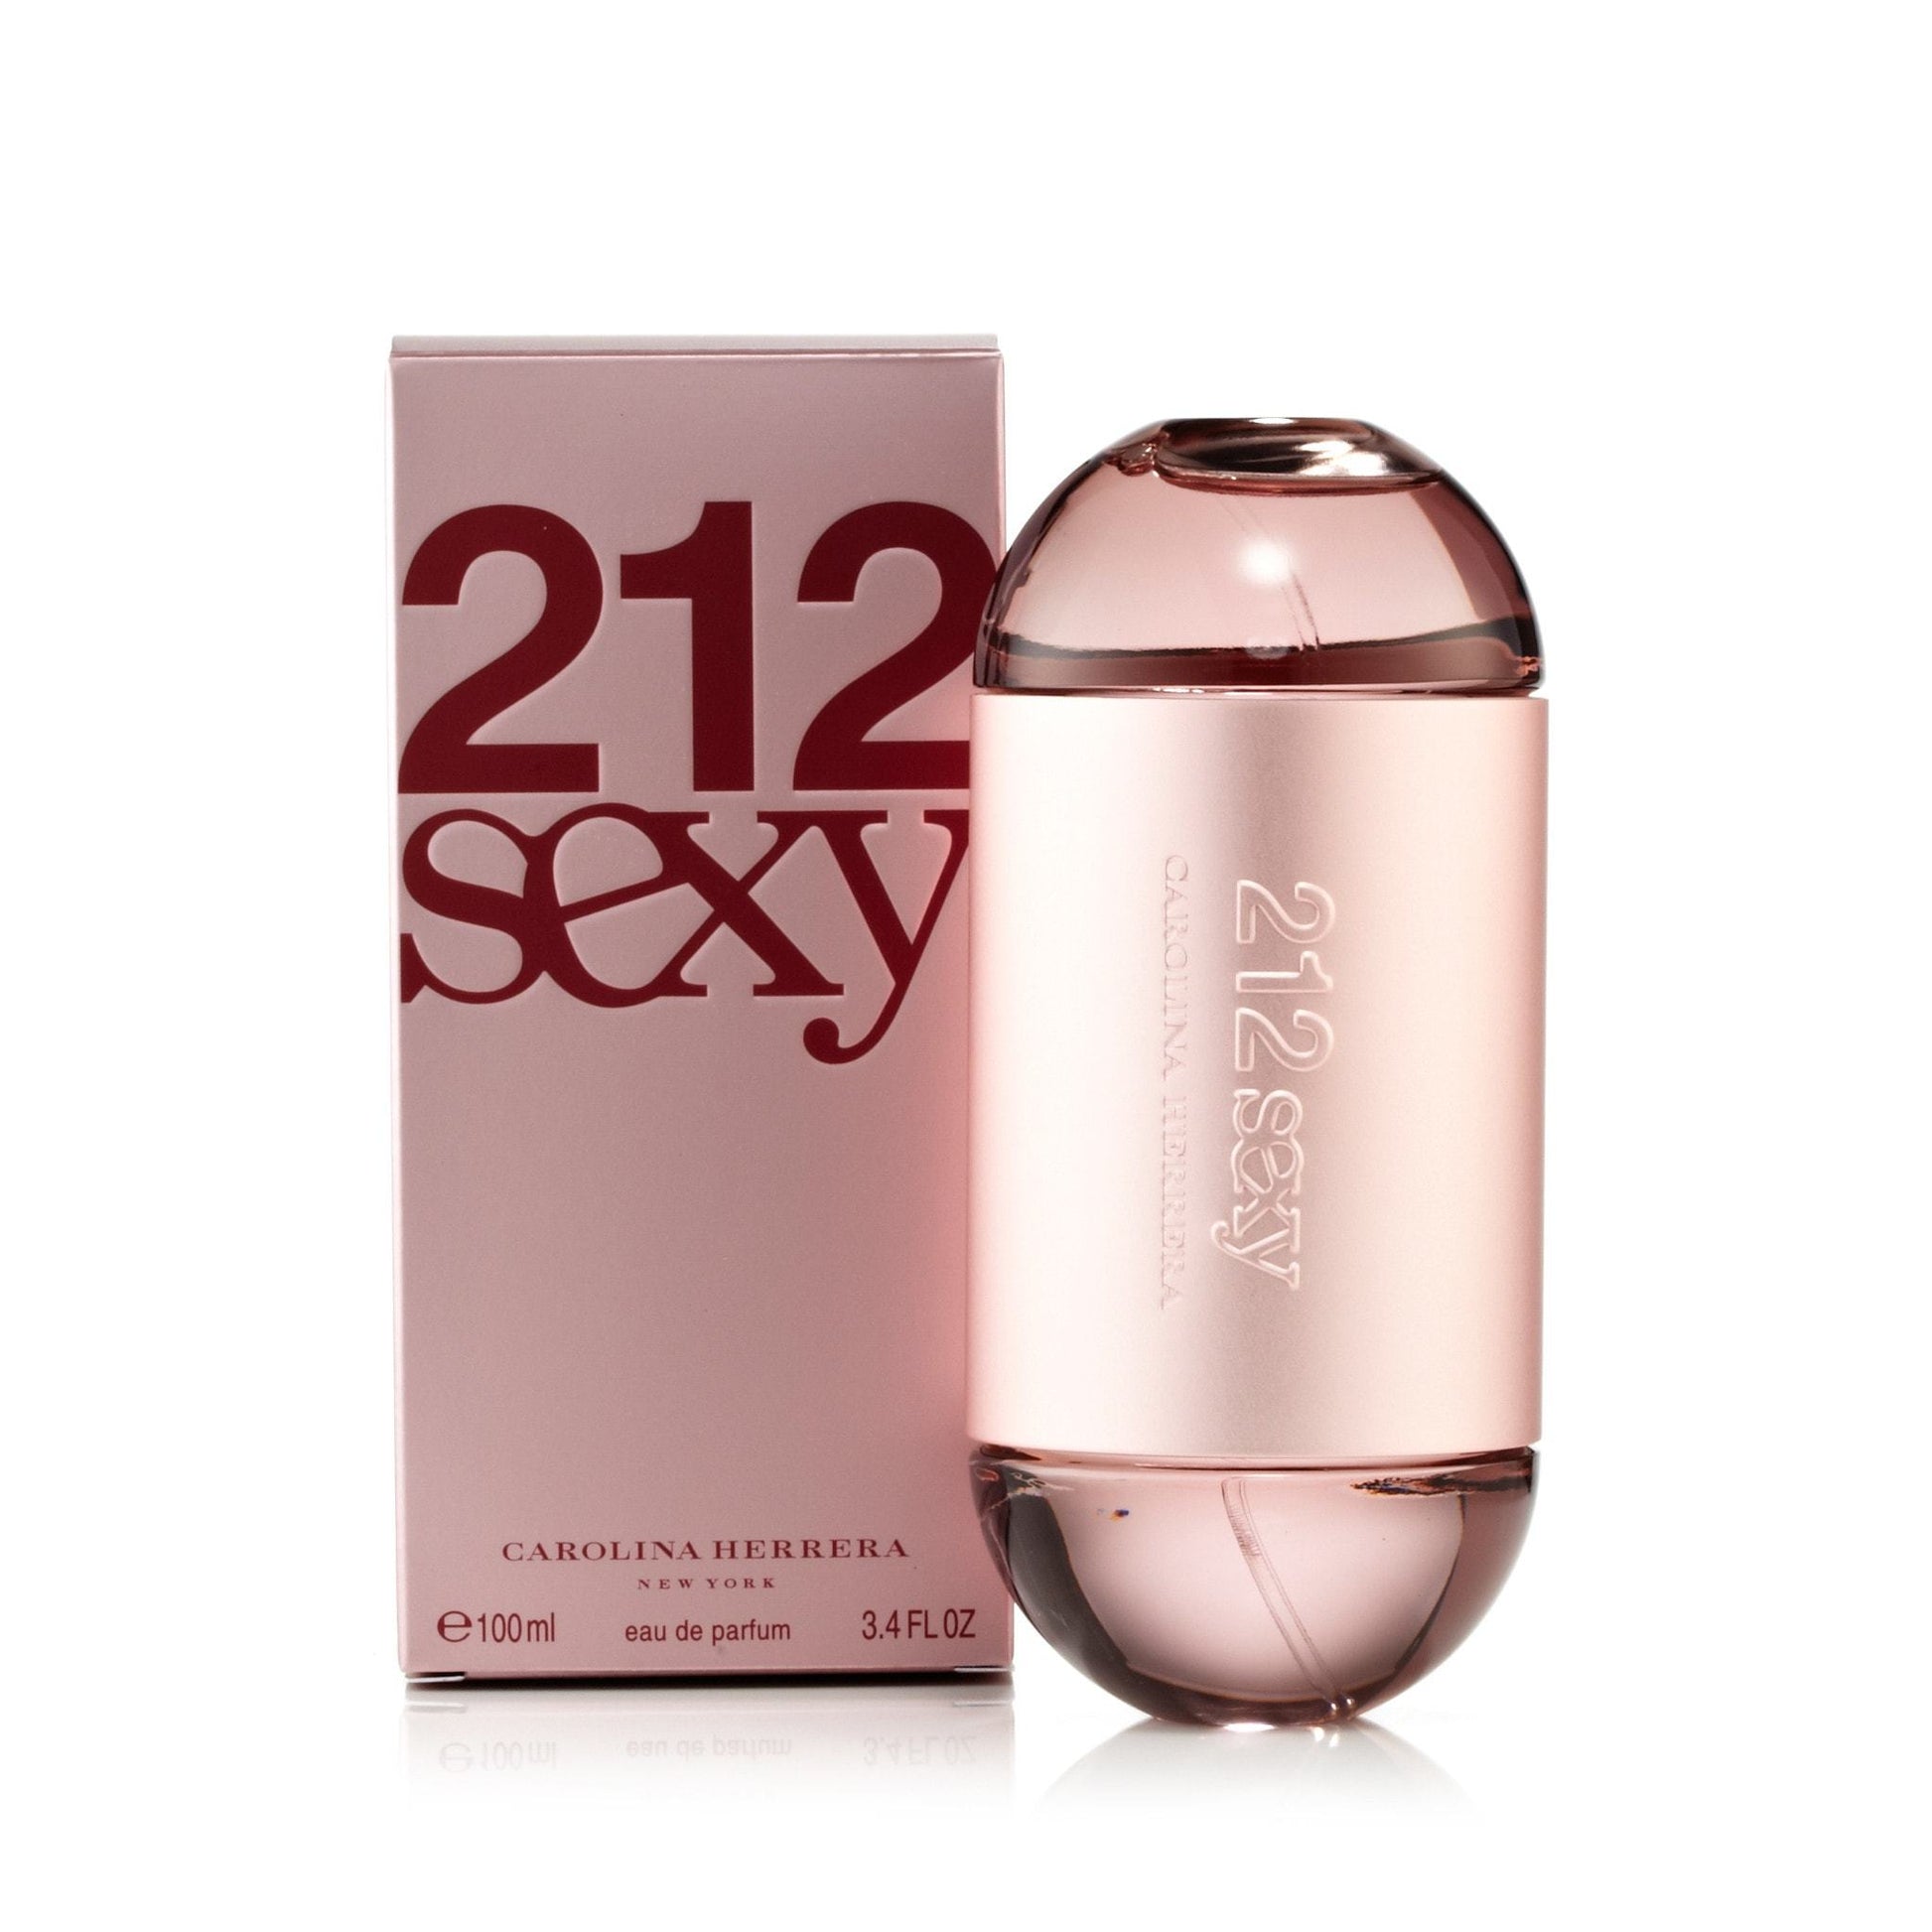 212 Sexy EDP – Herrera Women for Carolina by Fragrance Outlet